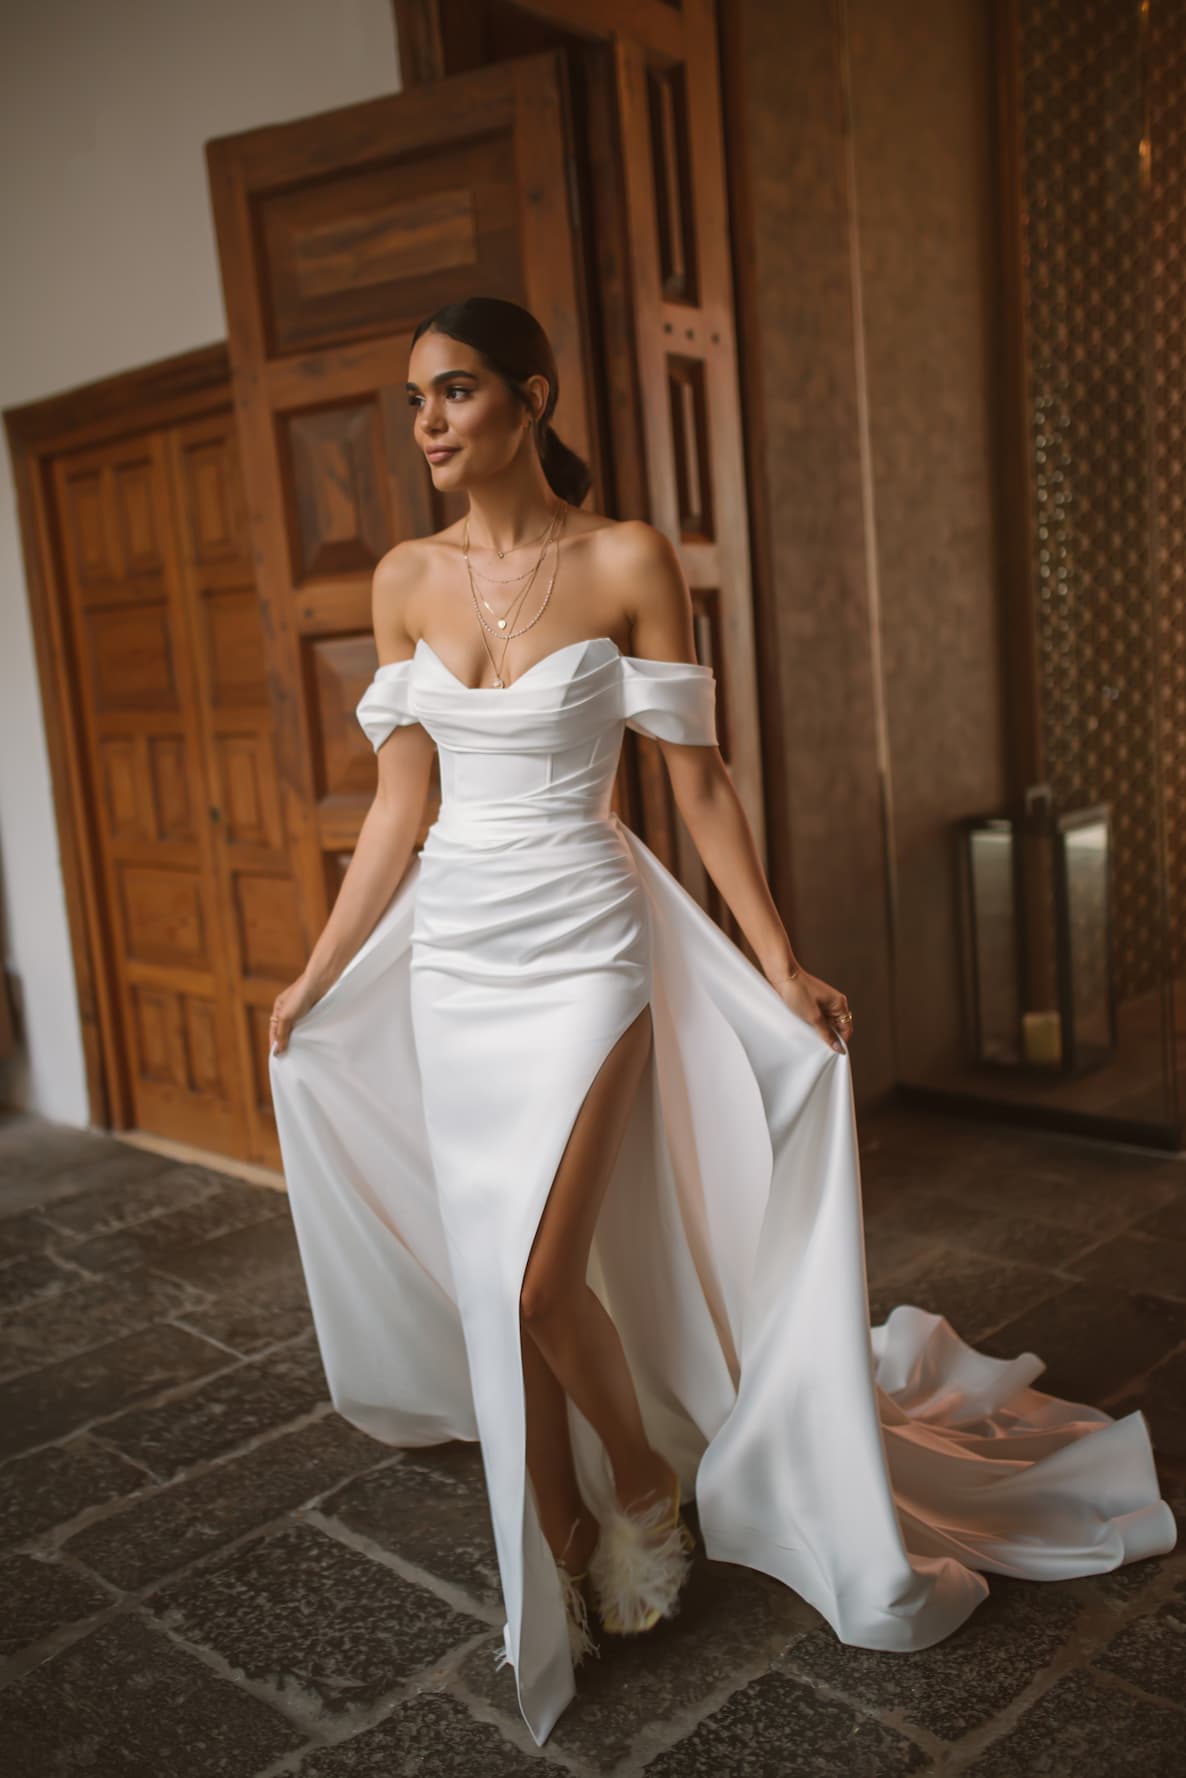 Fitted satin wedding dress in Auckland